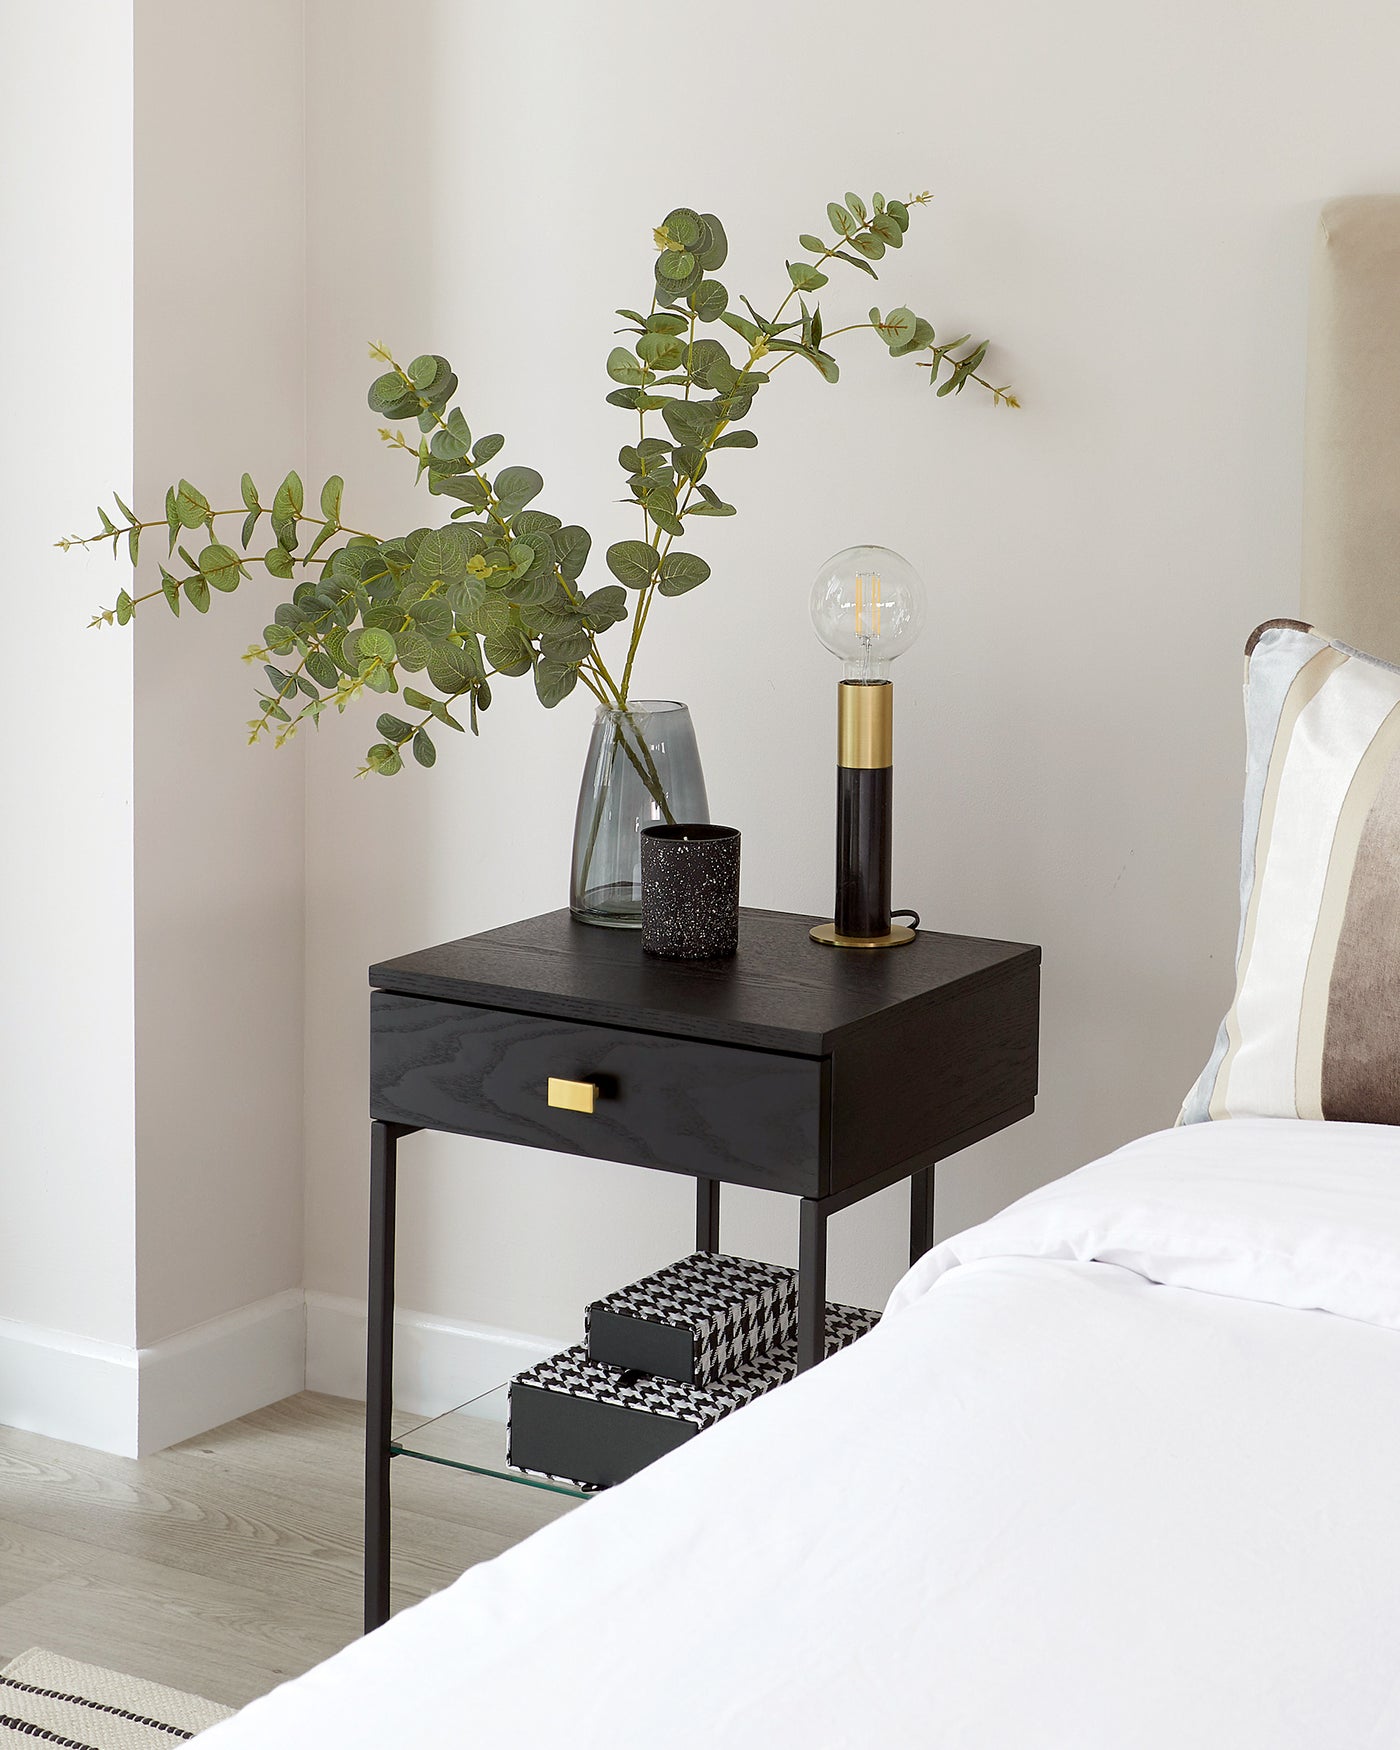 Elegant modern black bedside table with a sleek finish, featuring a single drawer with a brass pull handle, and a lower shelf with a glass insert. The table is styled with a contemporary glass vase with green branches, a decorative black textured candle holder, and a unique table lamp with a clear glass bulb and brass base.